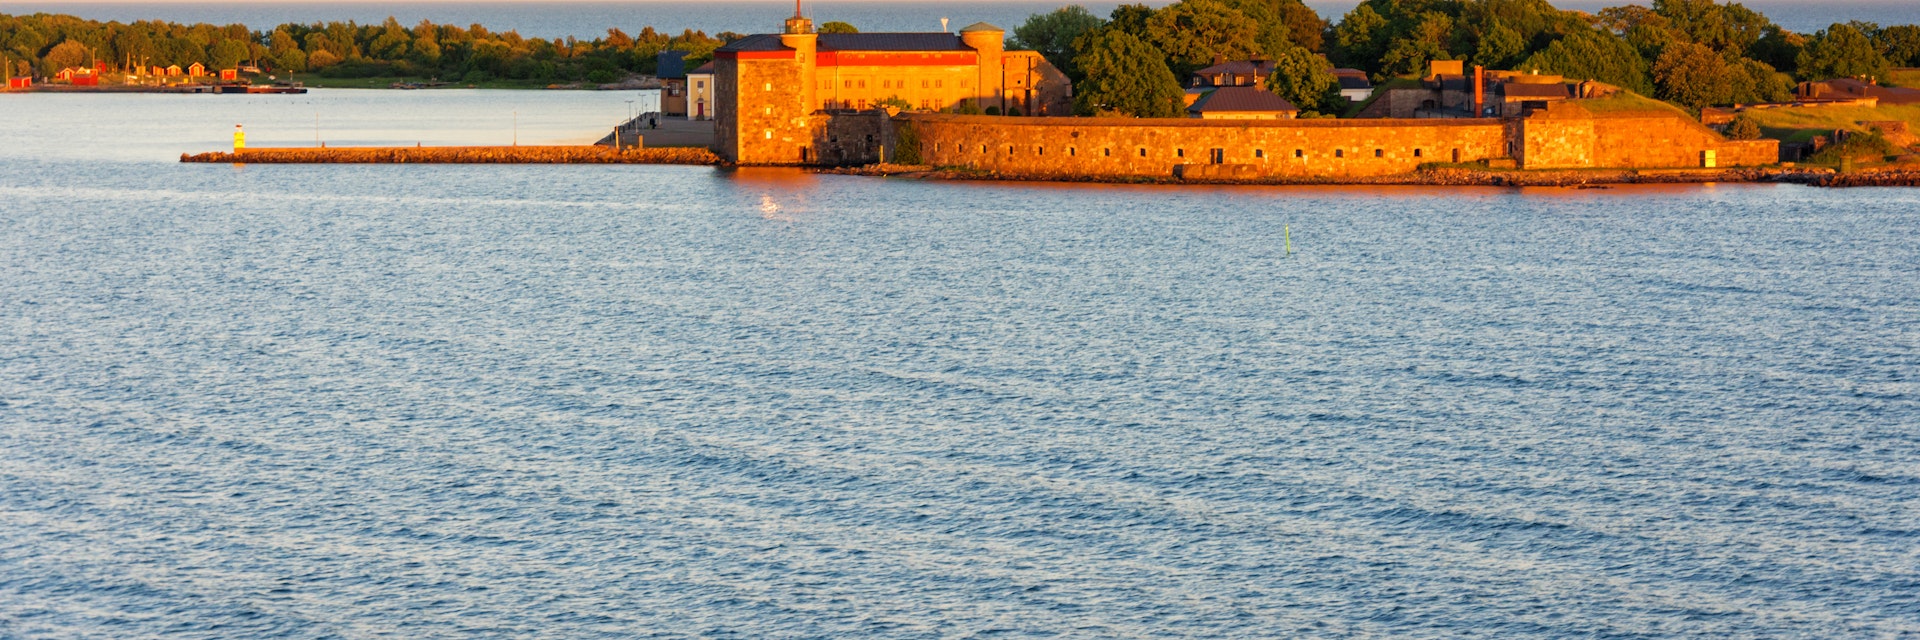 View of Kungsholms Fort.